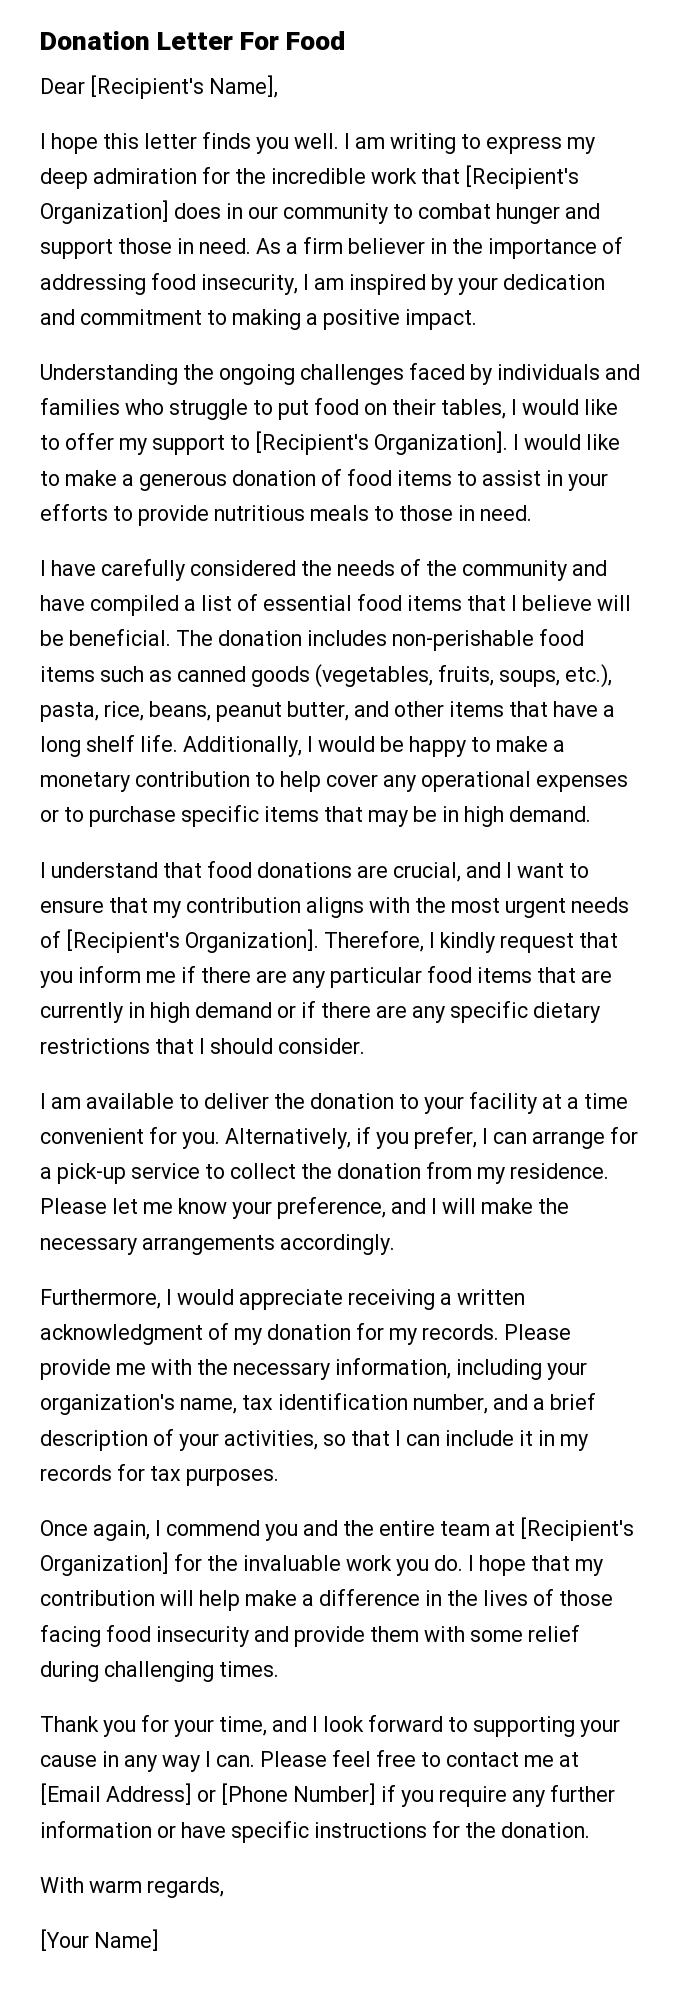 Donation Letter For Food